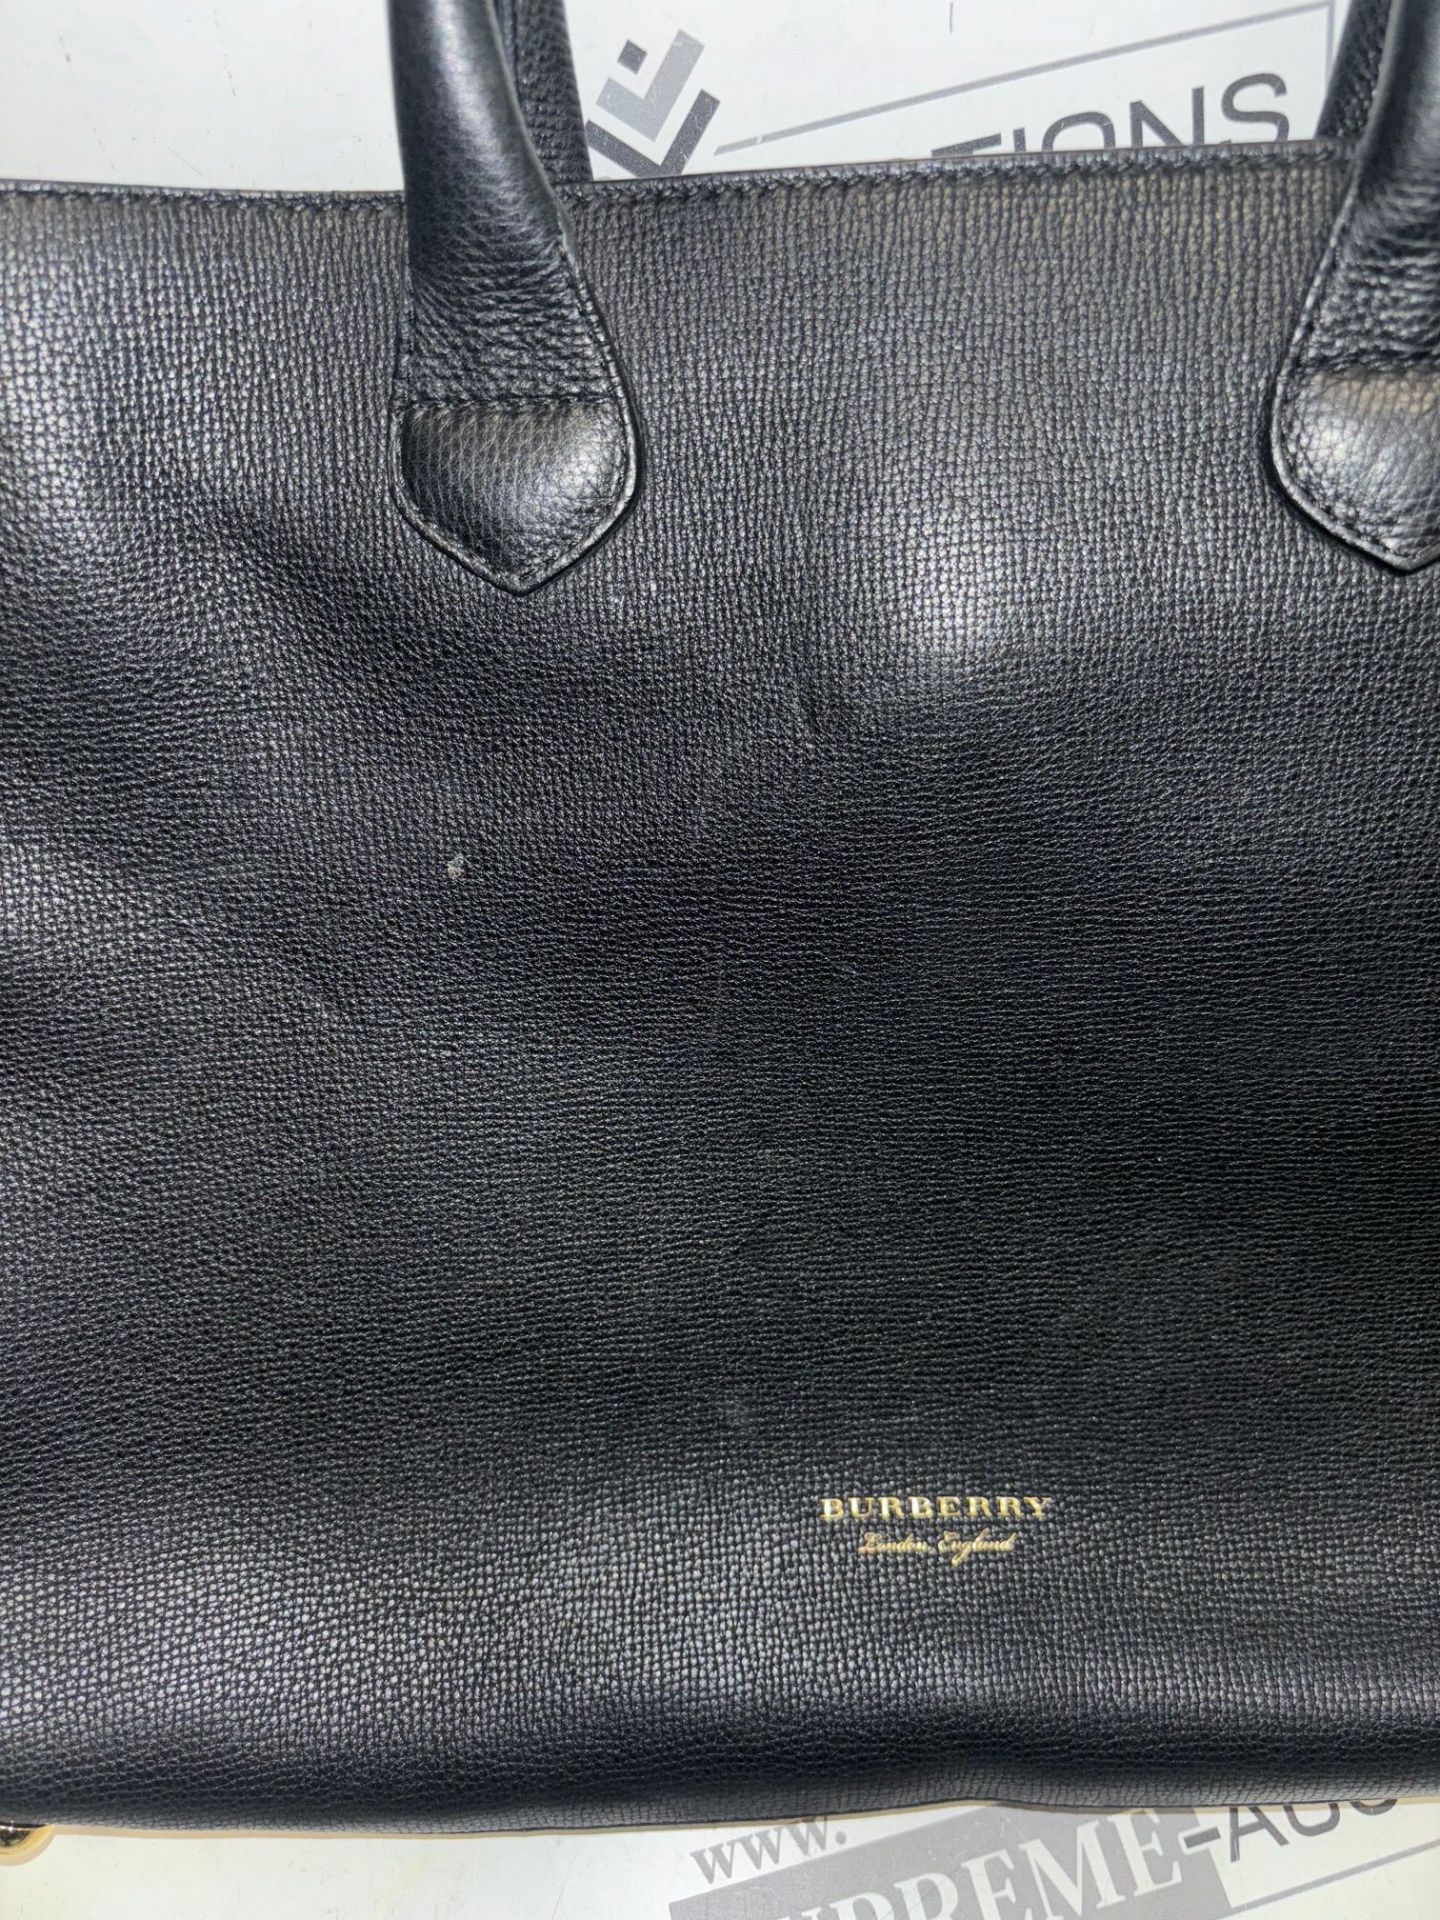 Burberry Derby Calfskin House Check Banner Tote Black. 45x30cm. - Image 6 of 13